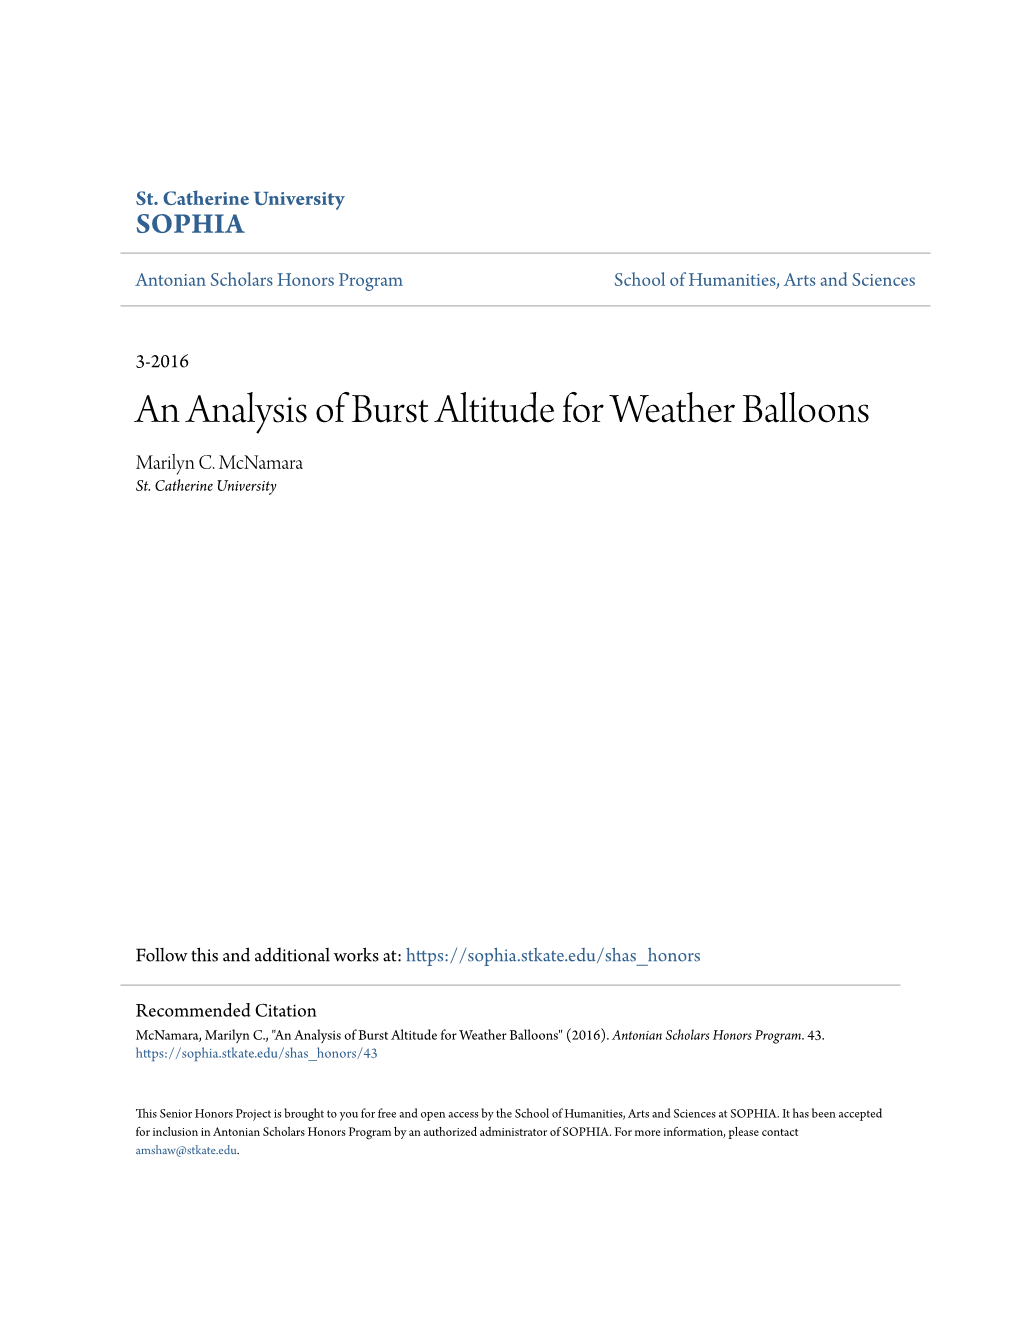 An Analysis of Burst Altitude for Weather Balloons Marilyn C